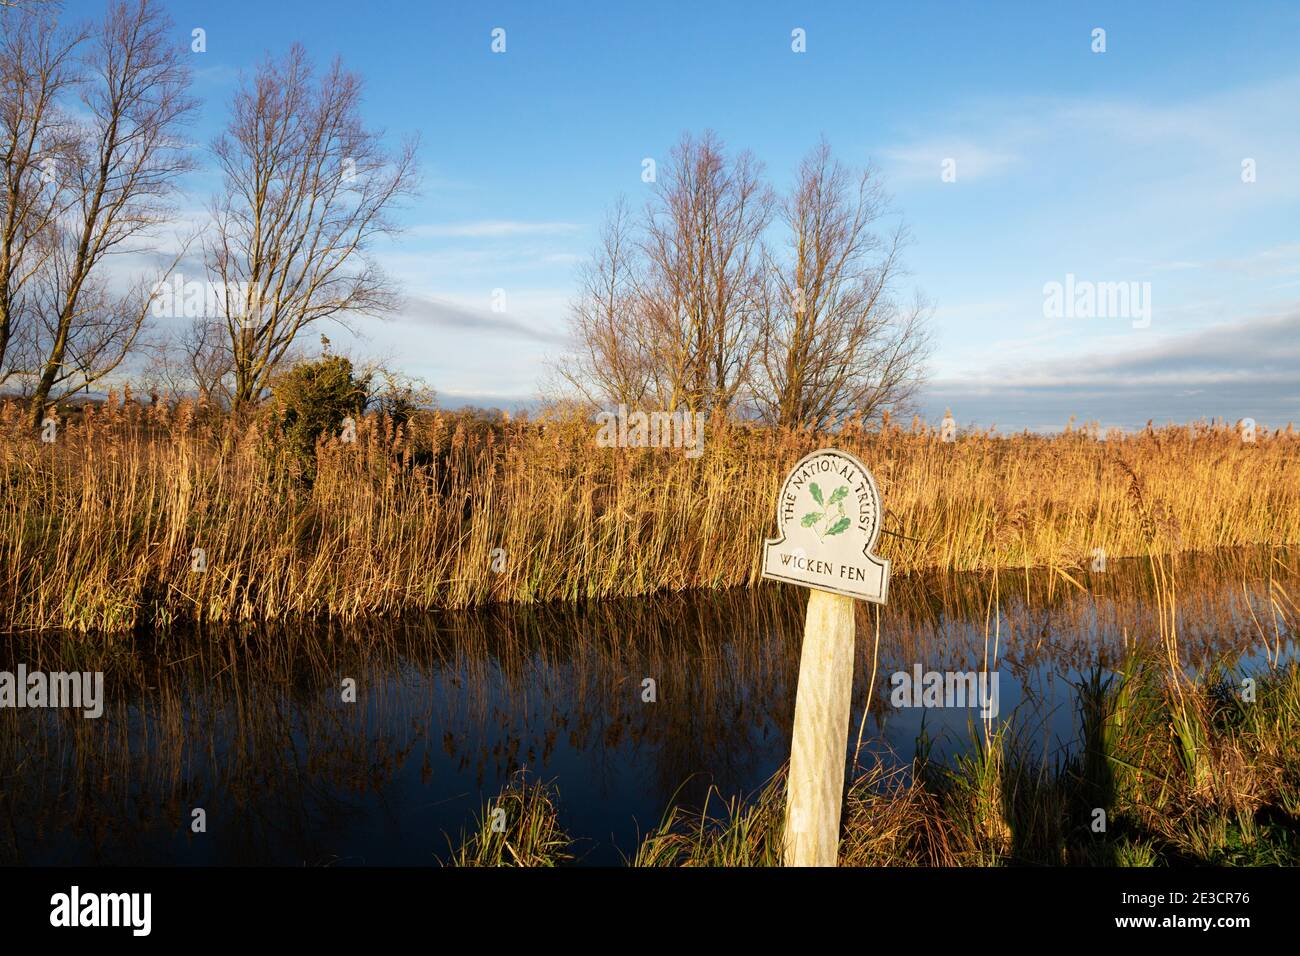 Wicken Fen; National Trust sign at the entrance to Wicken Fen from Burwell Fen, East Anglia, Cambridgeshire UK Stock Photo